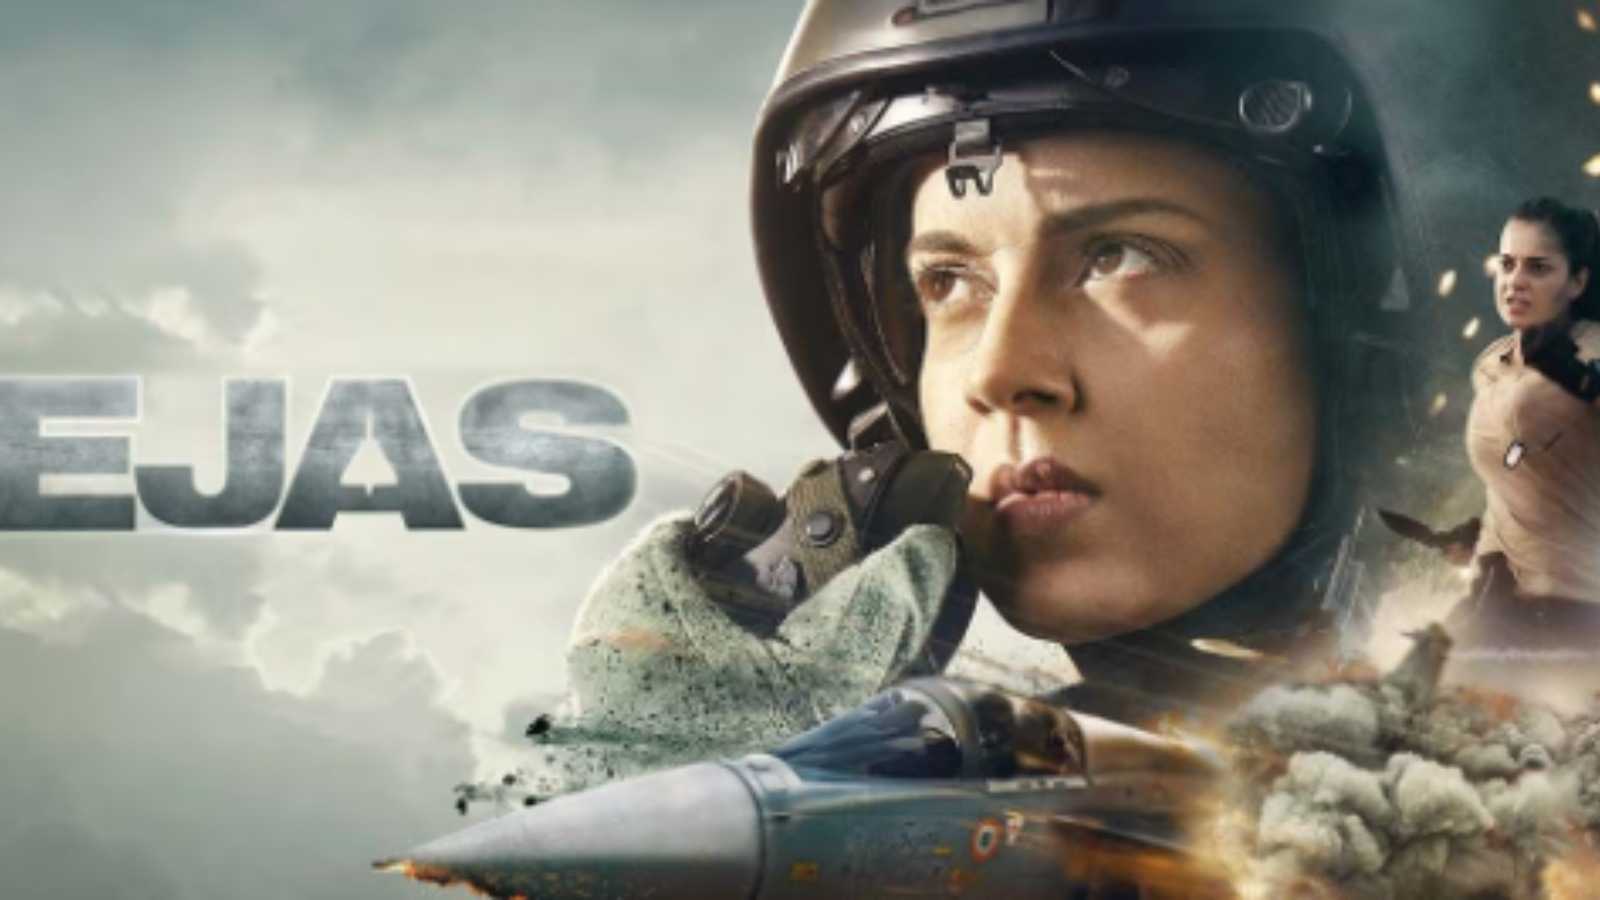 Tejas Movie Review: Kangana Ranaut's aerial actioner is all noise but no impact